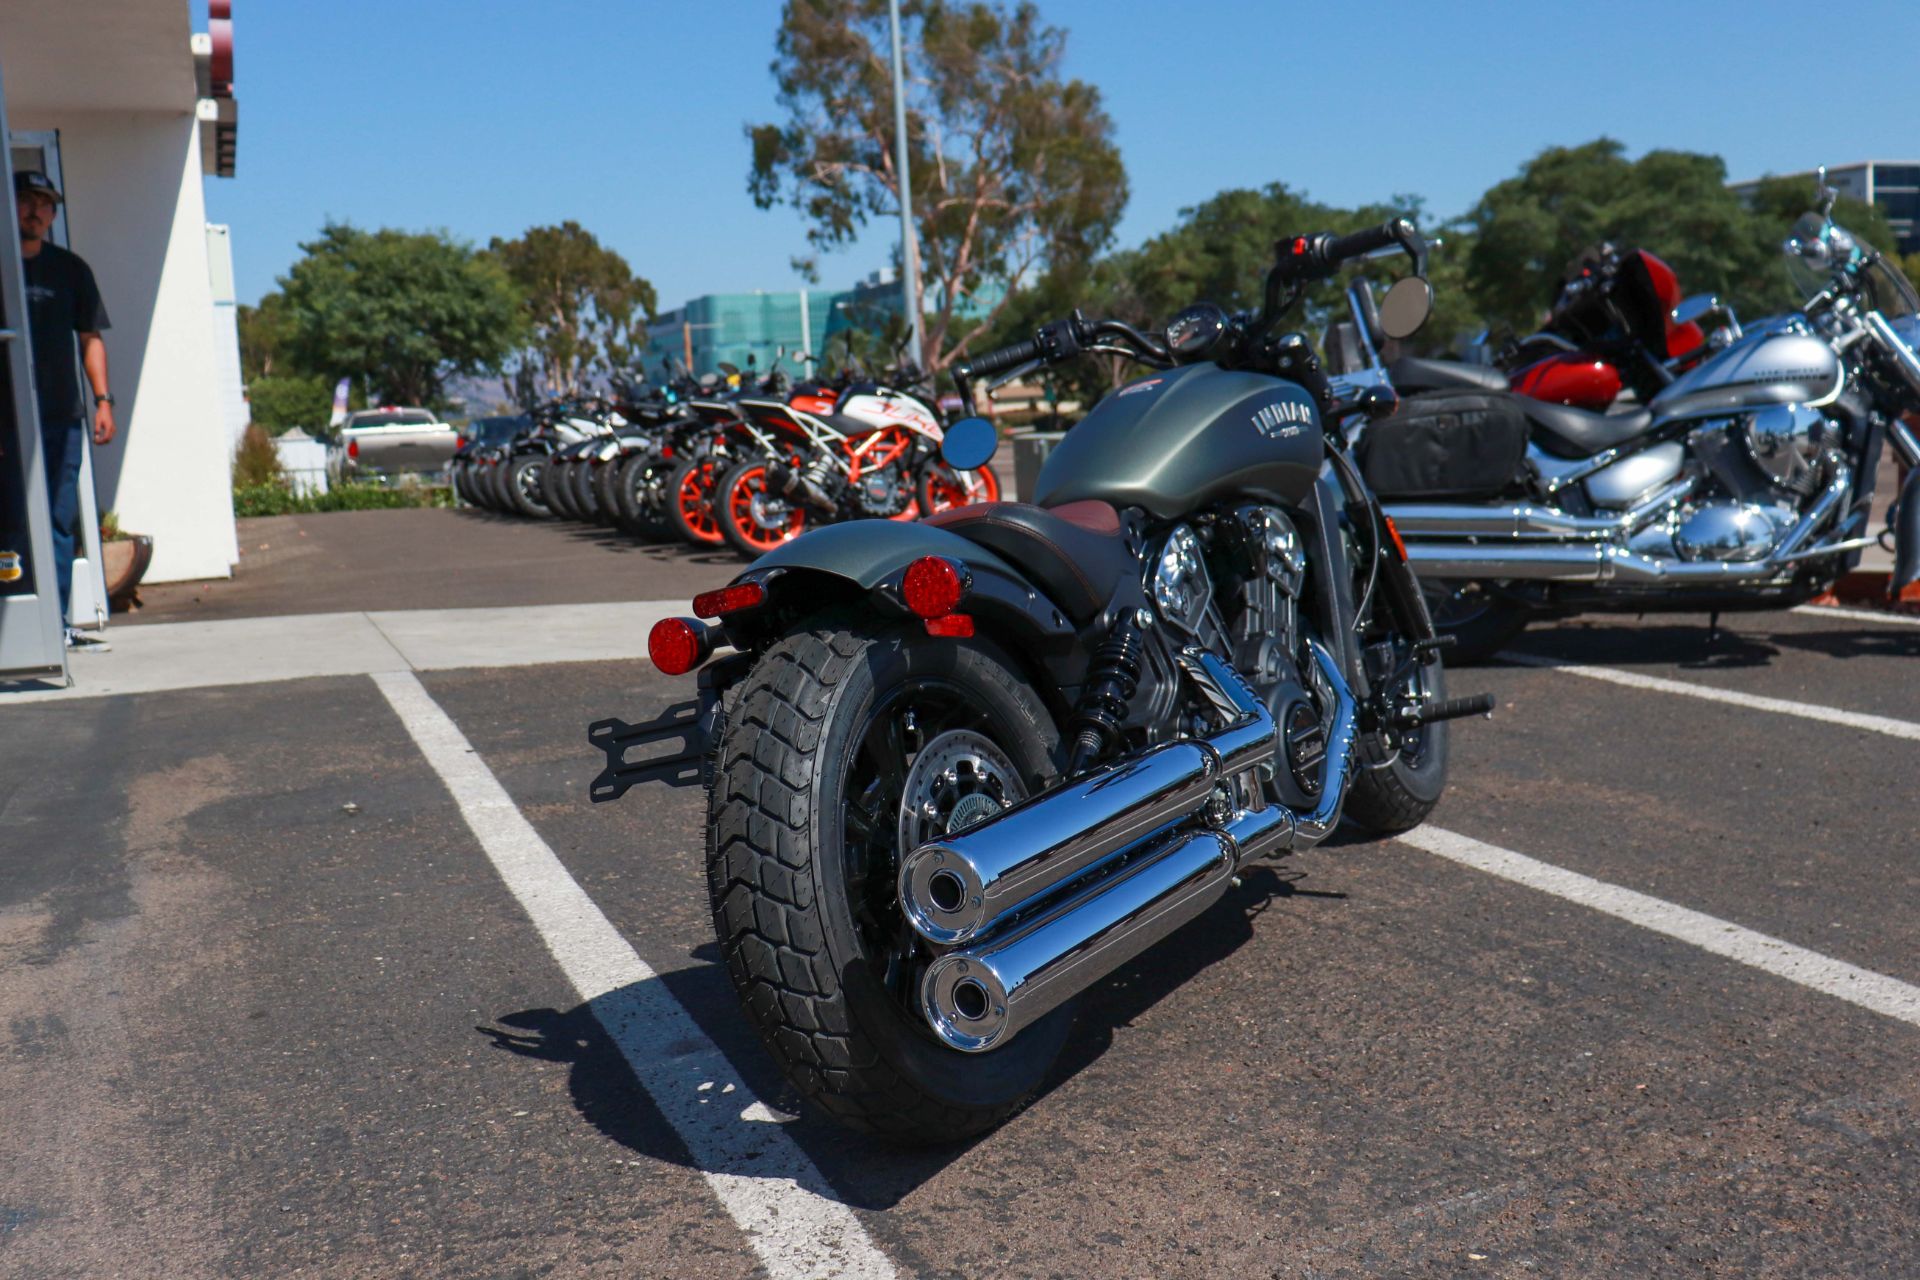 2022 Indian Scout® Bobber ABS in San Diego, California - Photo 7